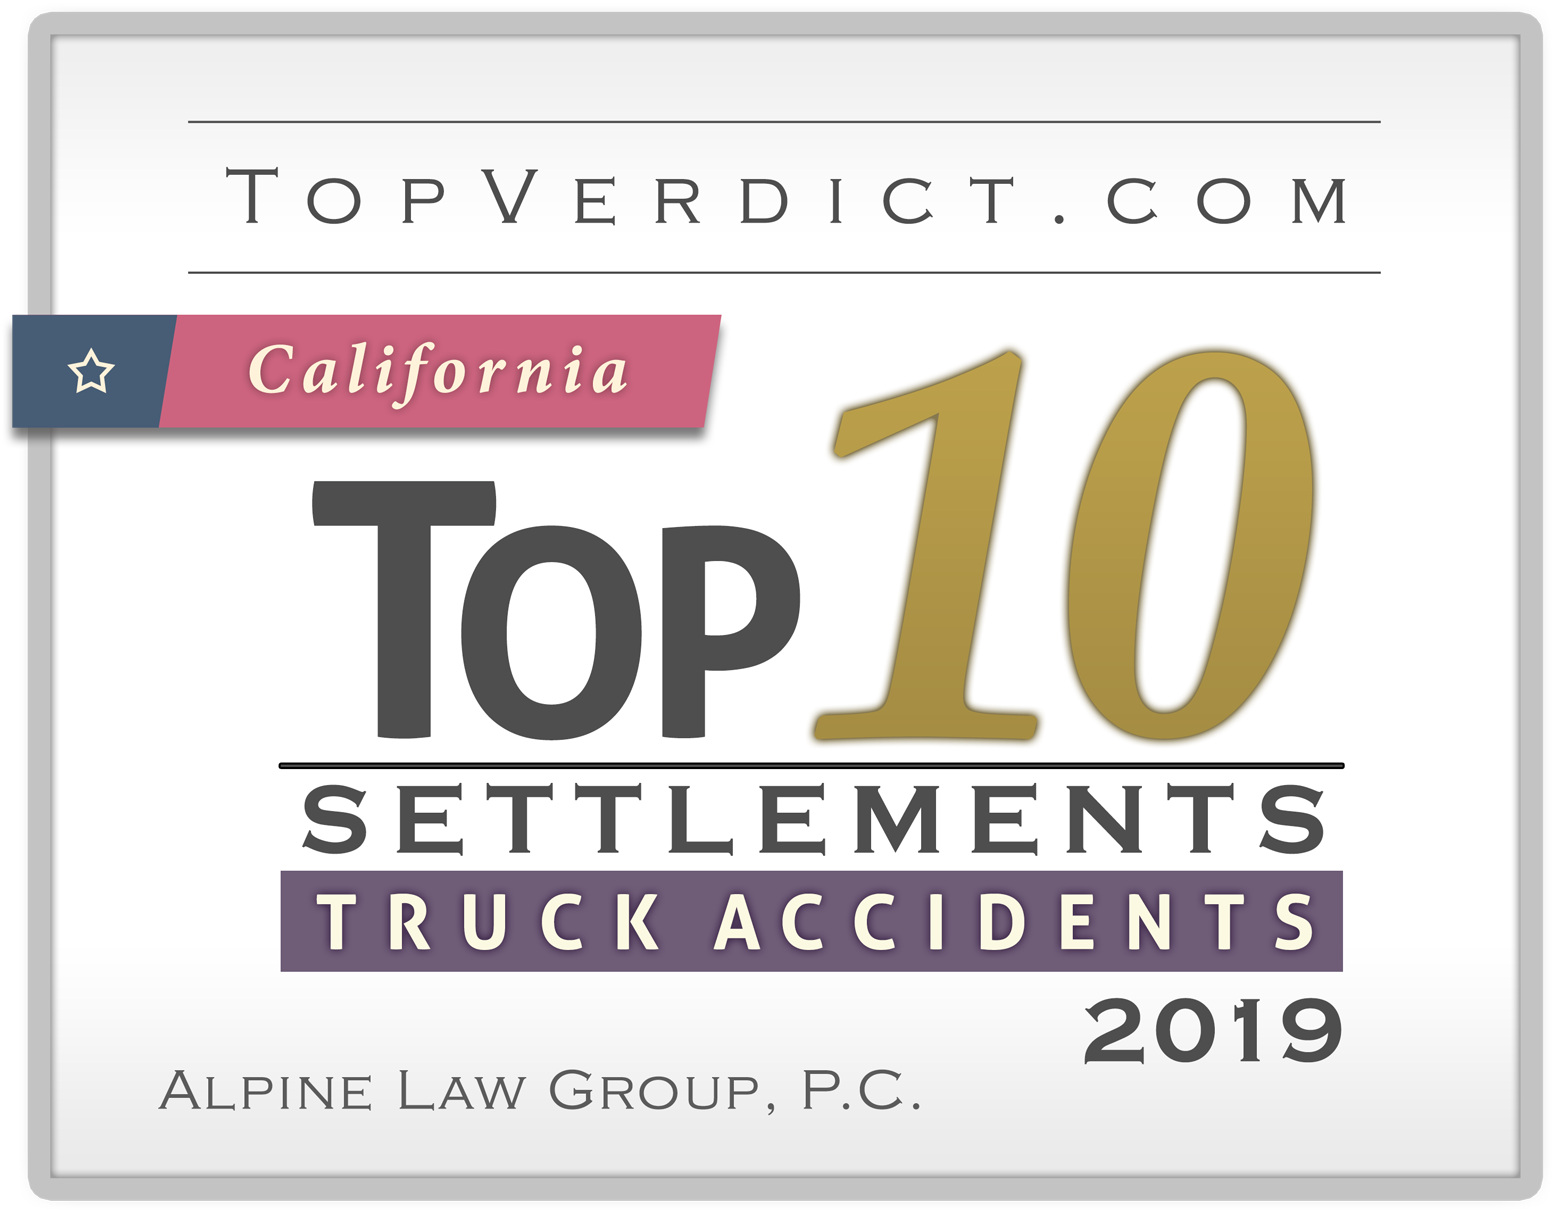 Top 10 Truck Accident Settlements in California in 2019